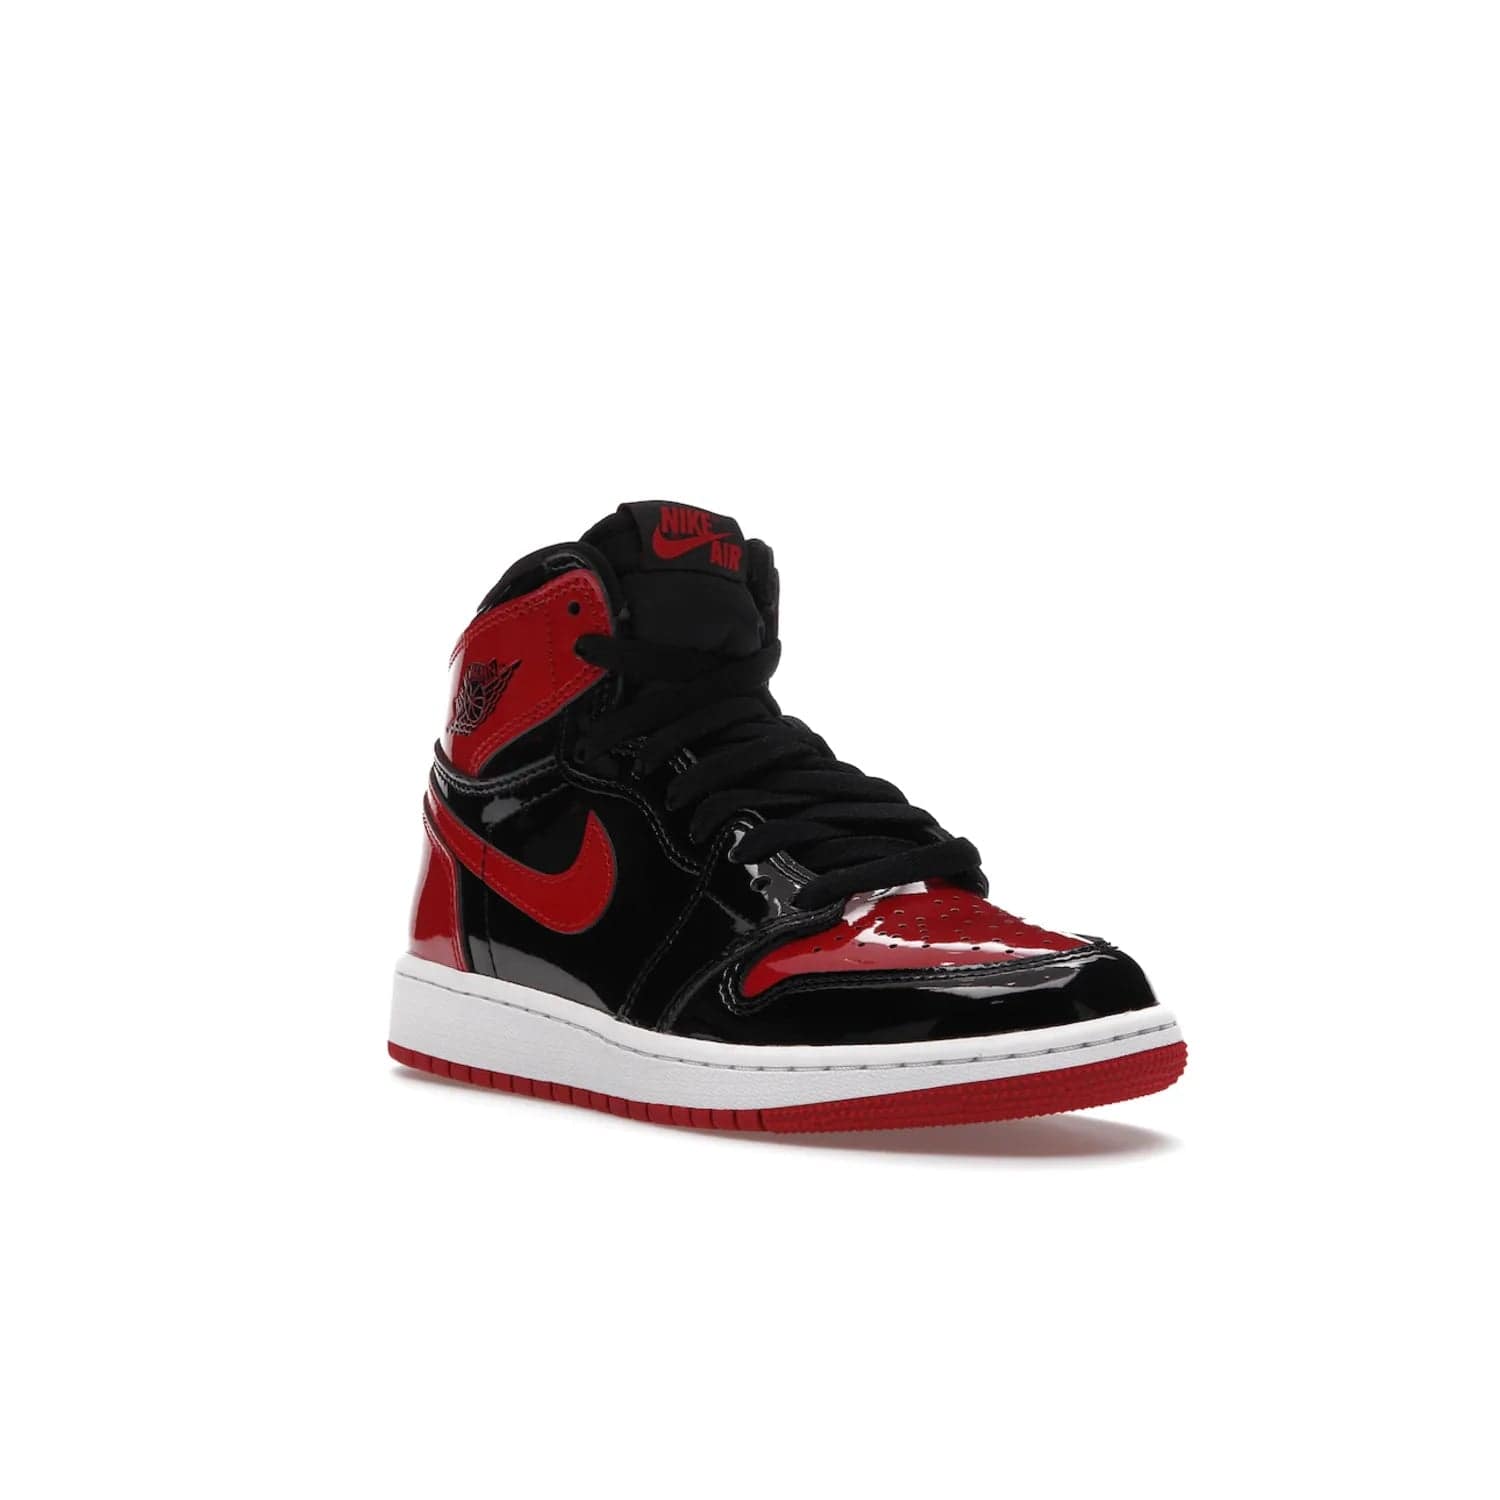 Jordan 1 Retro High OG Patent Bred (GS) - Image 6 - Only at www.BallersClubKickz.com - Upgrade your sneaker game with the iconic Air Jordan 1 Retro High OG Bred Patent GS. Crafted with premium patent leather and basketball-inspired details for a classic look, they also feature an encapsulated Air-sole cushioning and enhanced red rubber outsole. Don't miss this timeless sneaker with a striking black, white, and varsity red colorway, dropping December 2021.